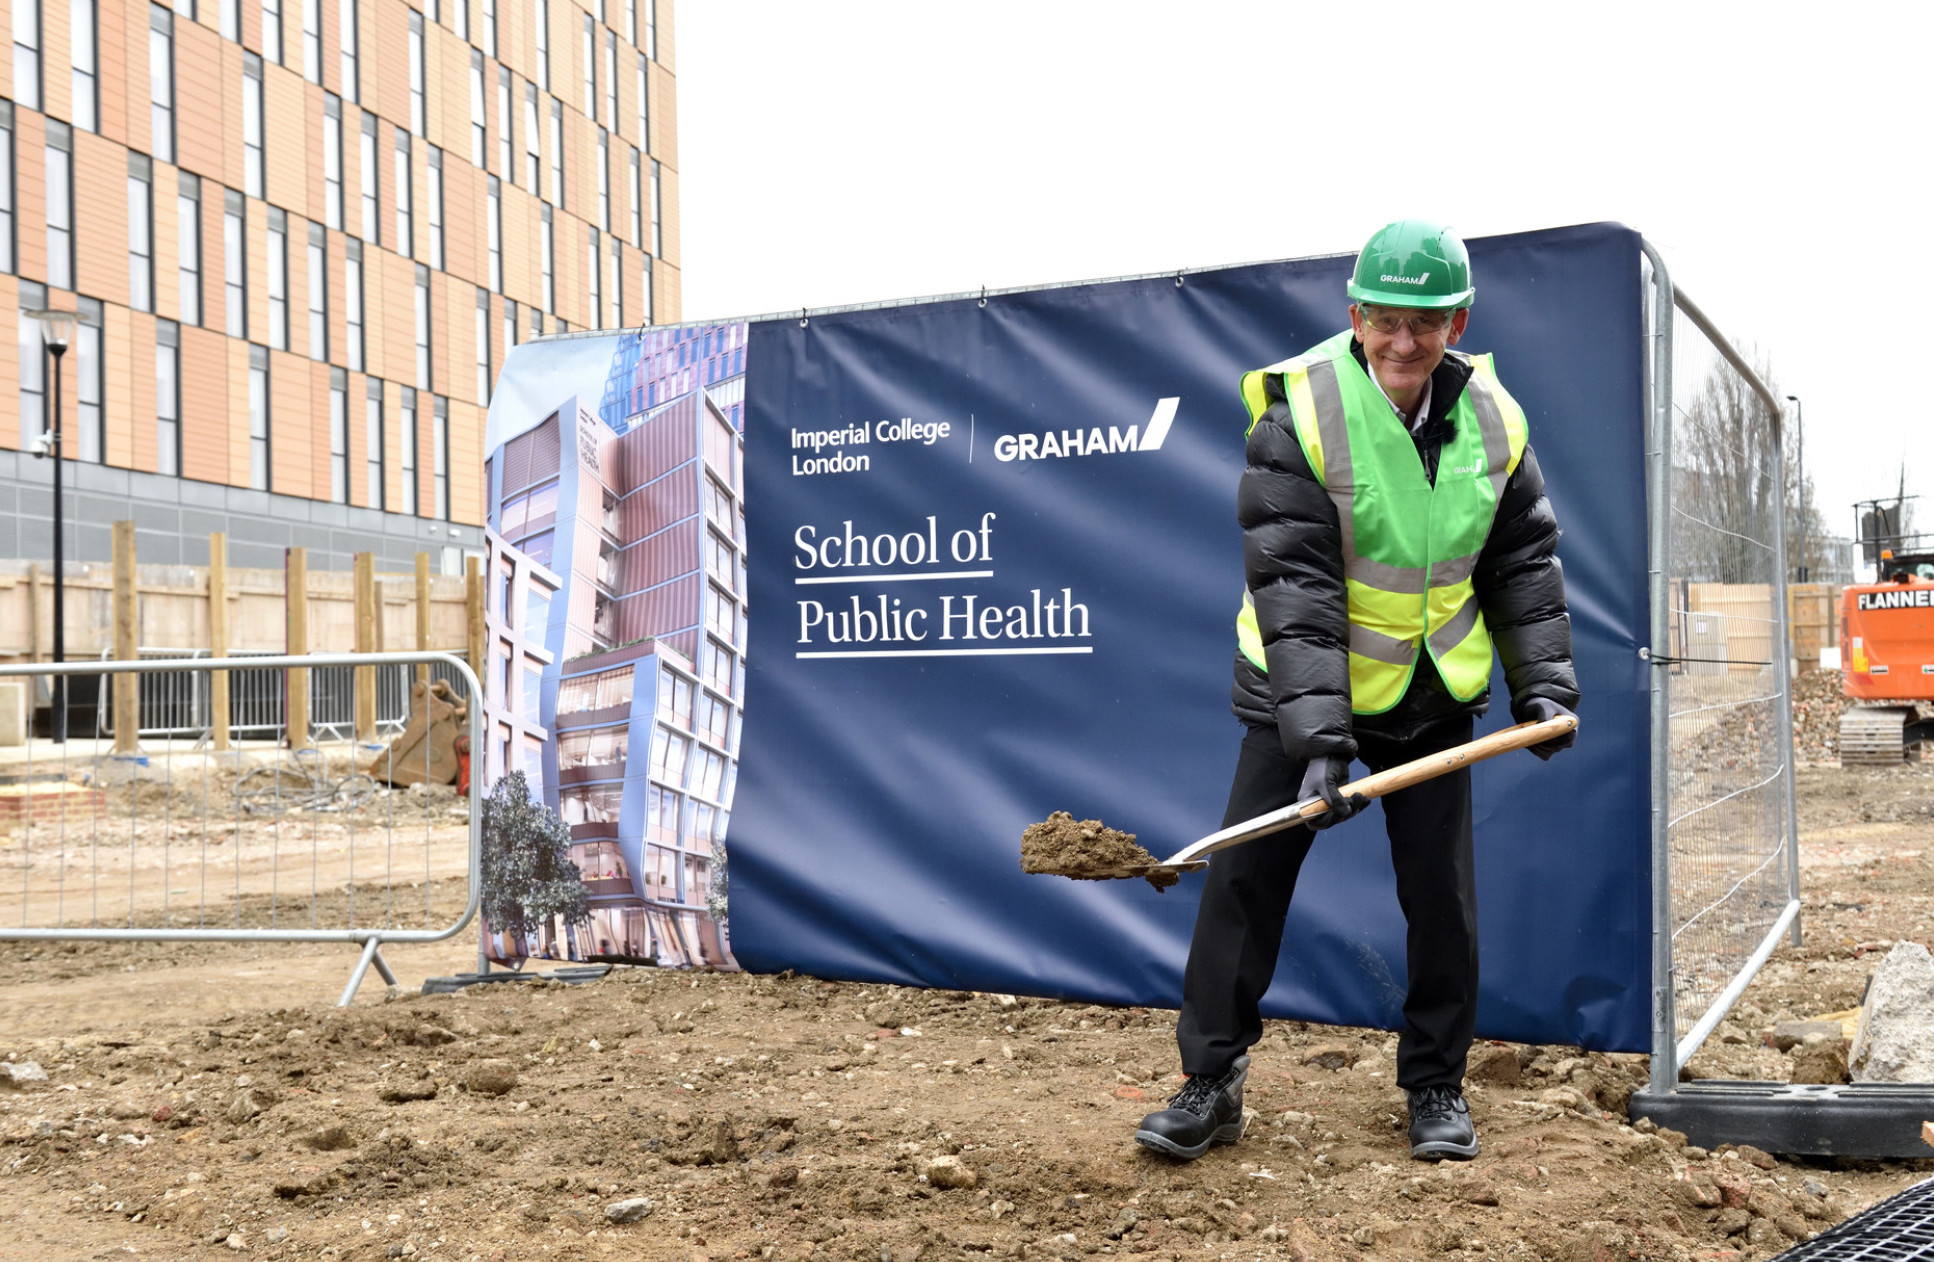 Professor Neil Alford breaking ground on the site last month